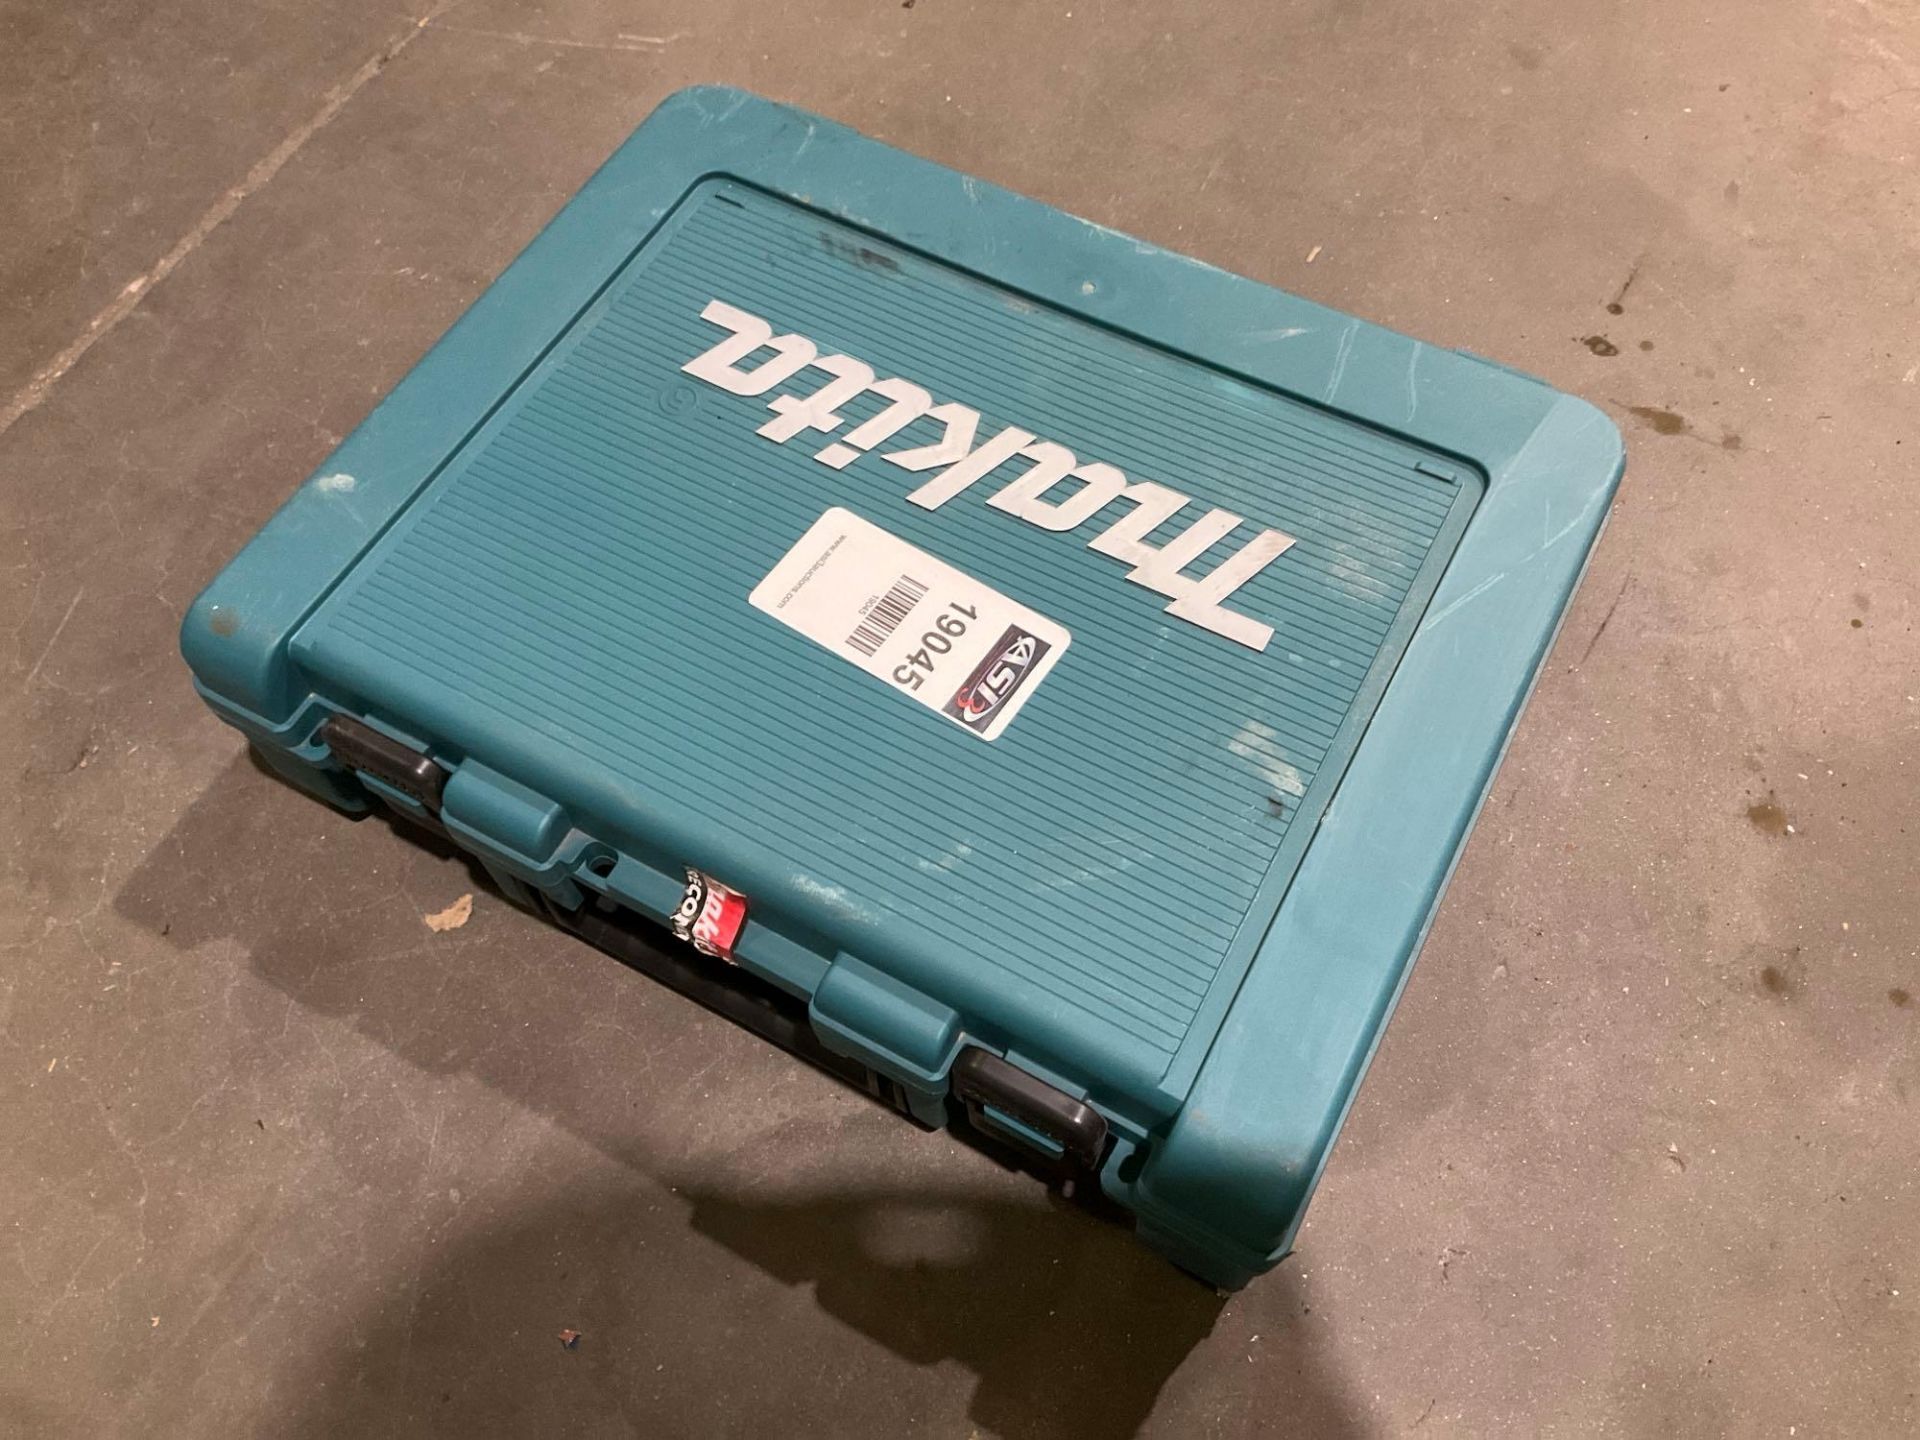 MAKITA ROTARY HAMMER MODEL HR2811F IN CARRYING CASE, RECONDITIONED - Image 4 of 5